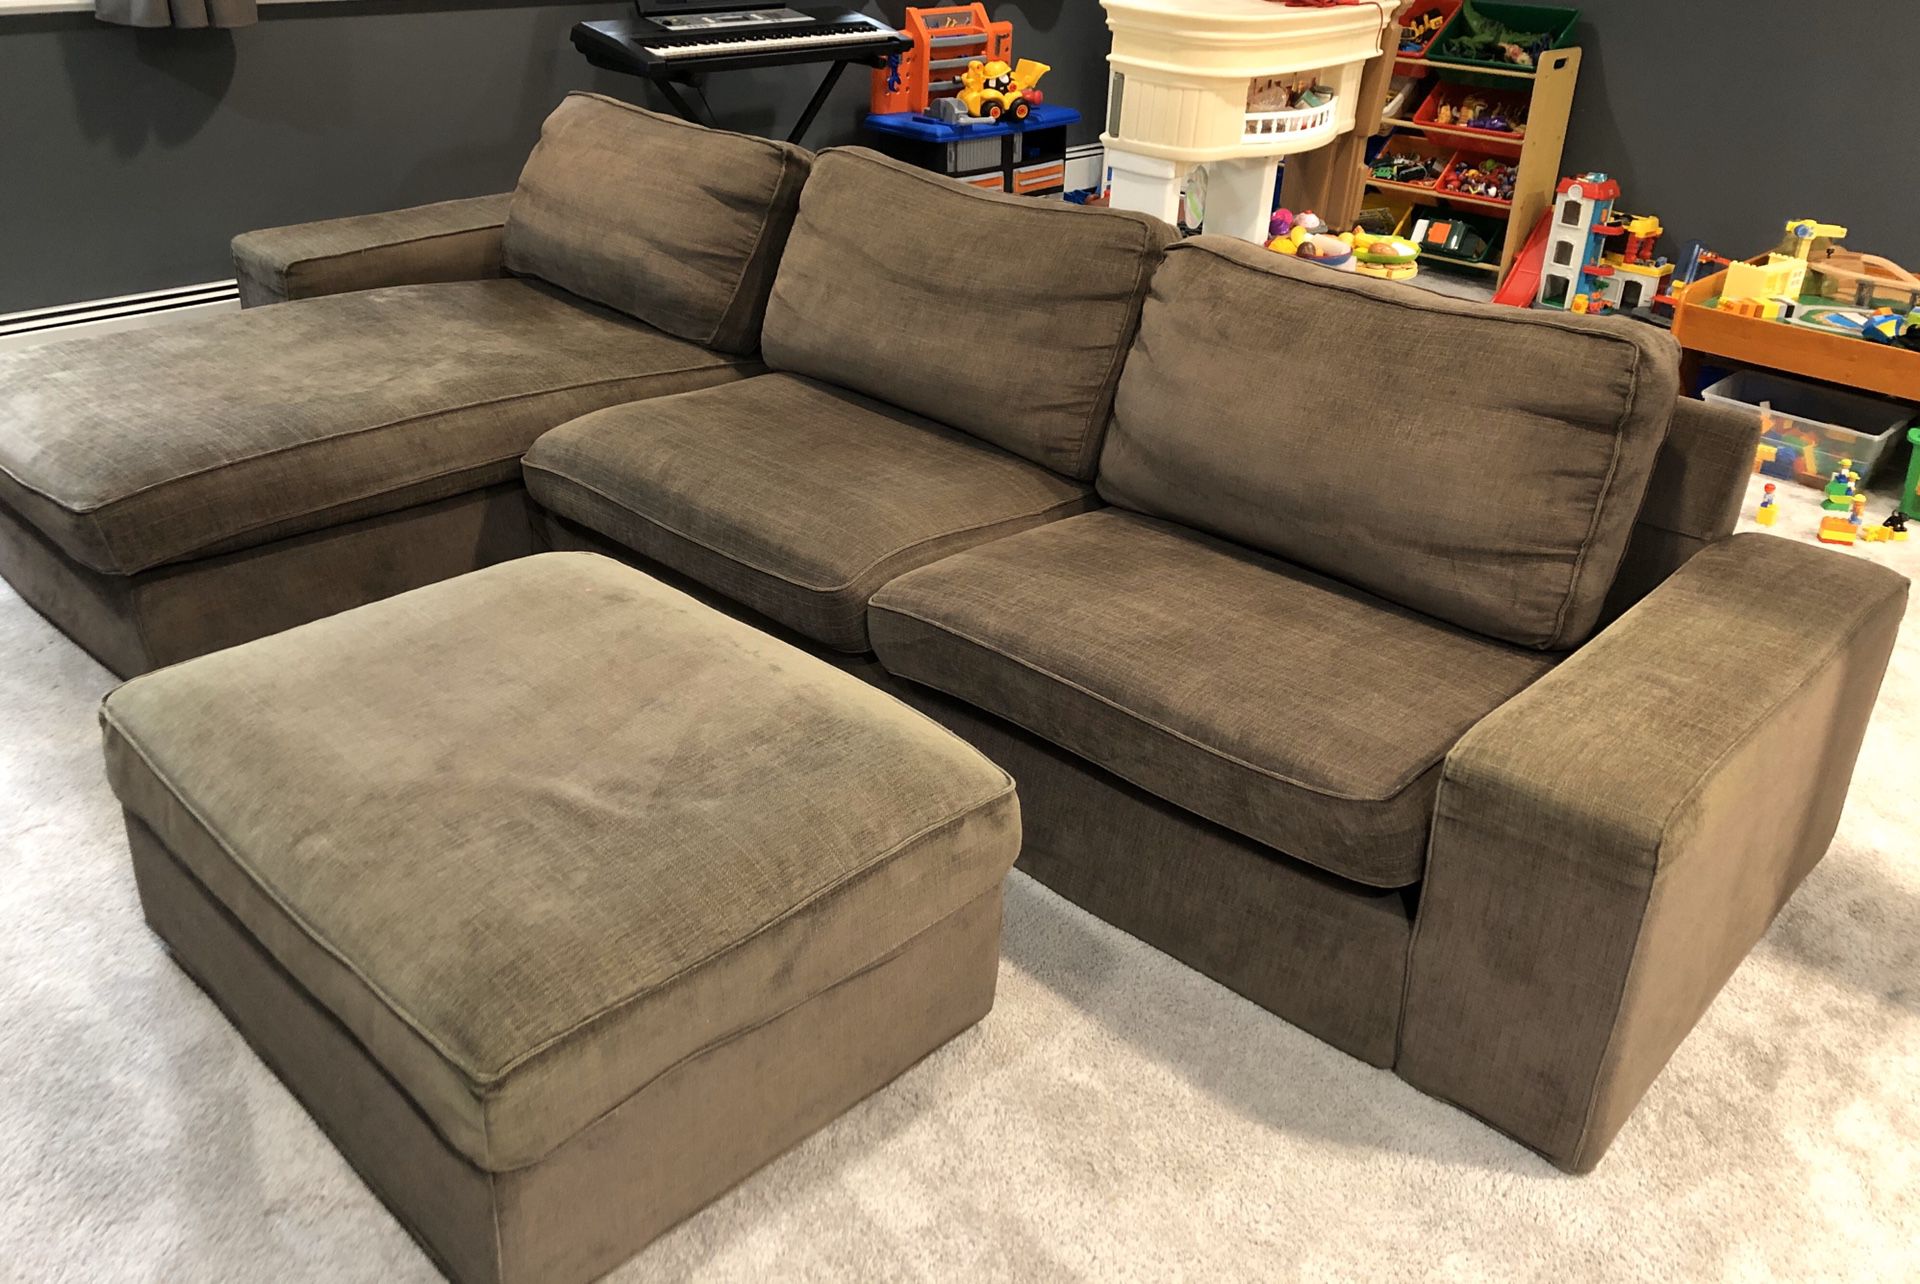 IKEA sectional sofa with ottoman and storage